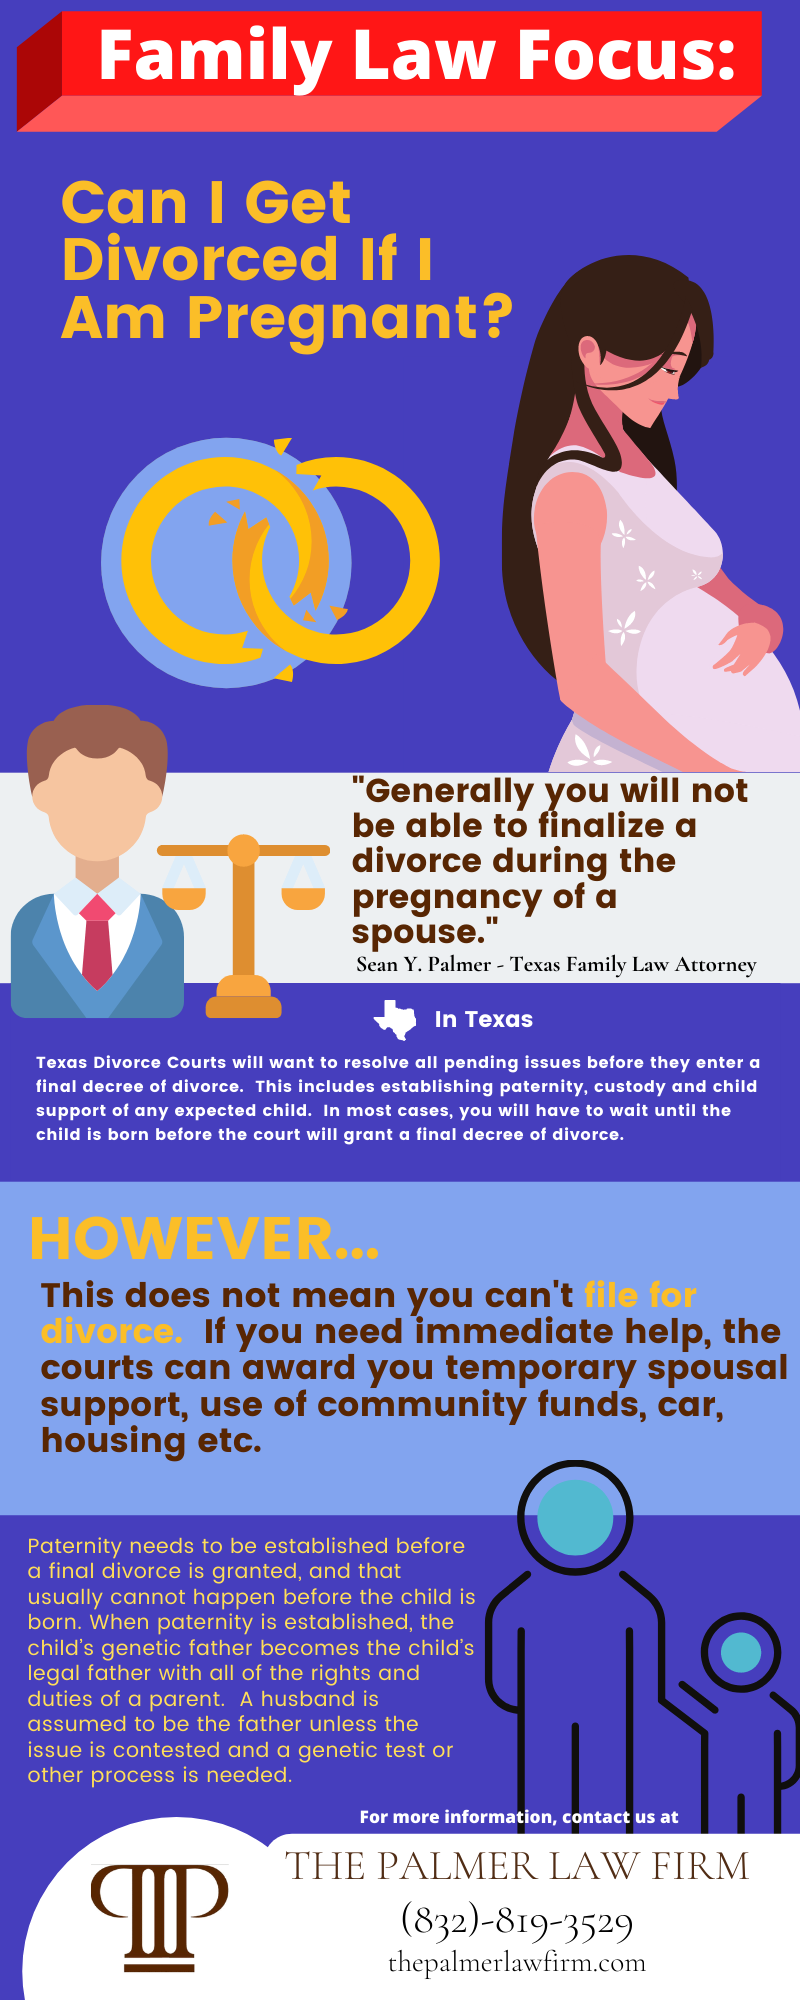 What is considered immediate family in texas?